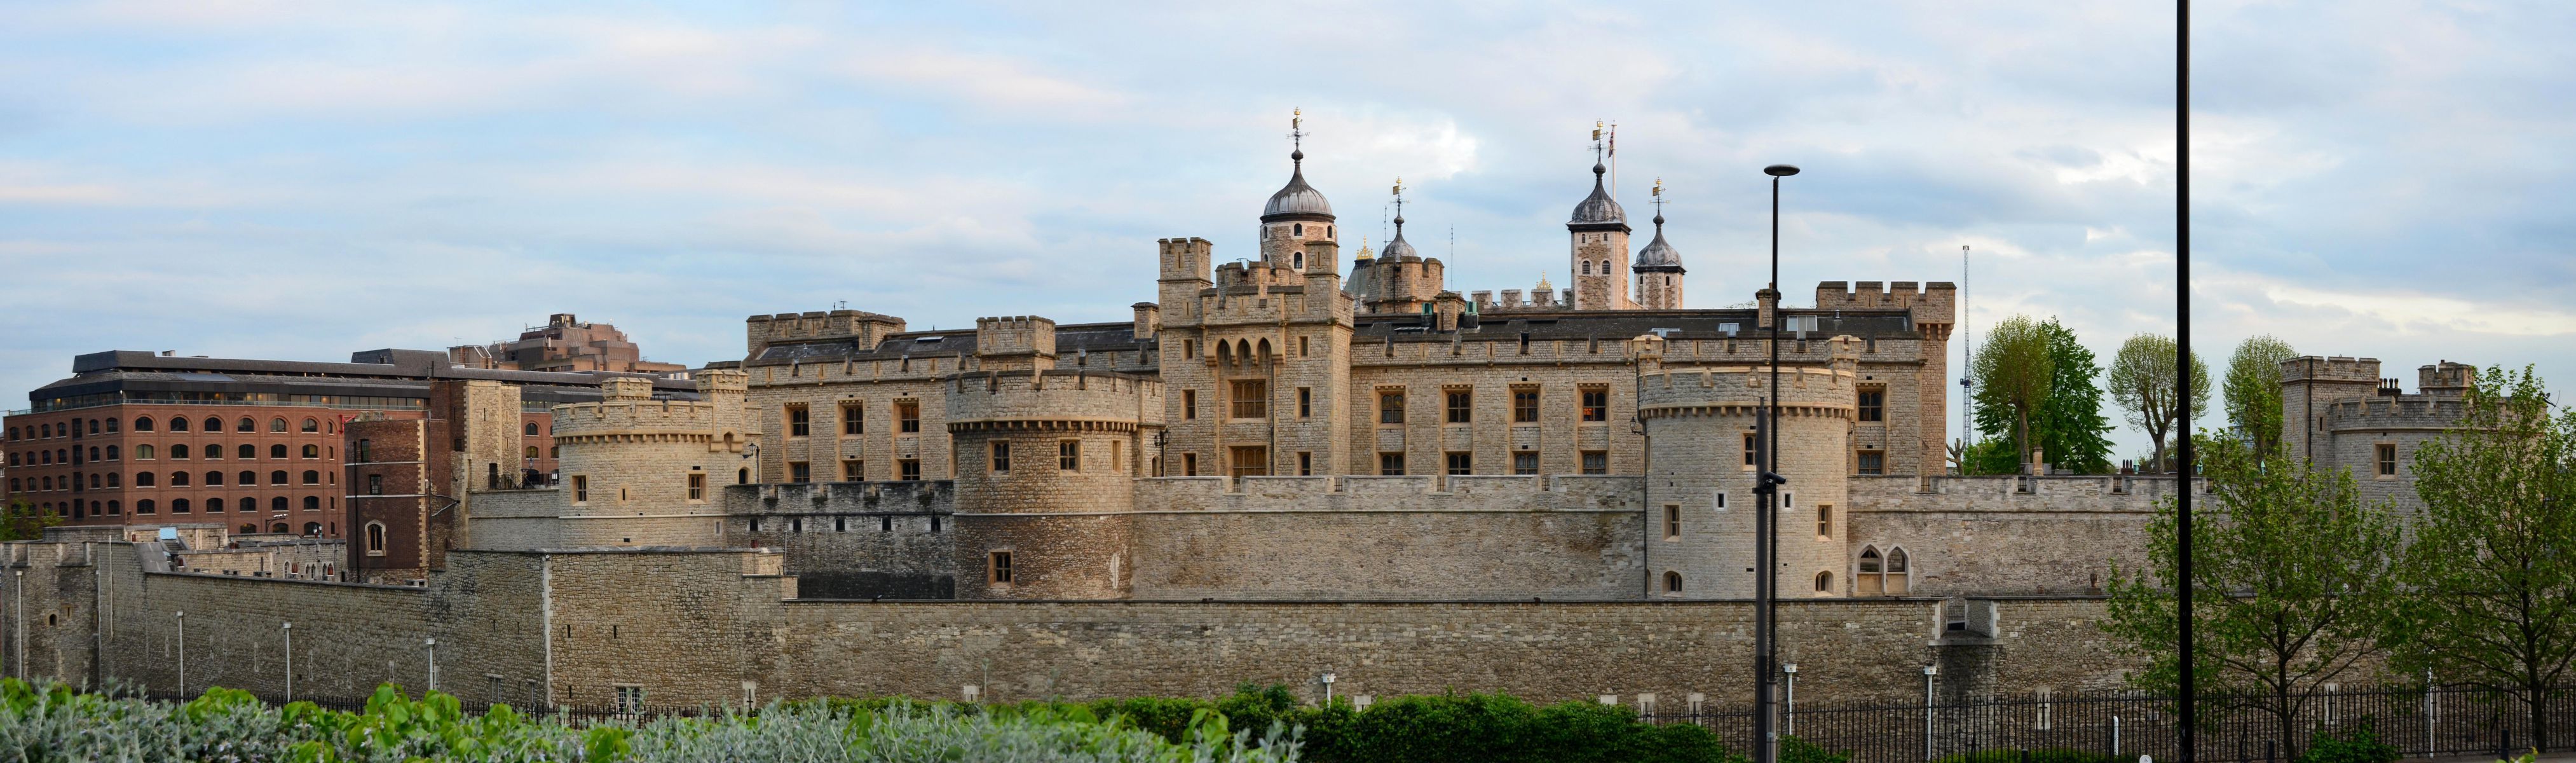 The Tower of London2.jpg